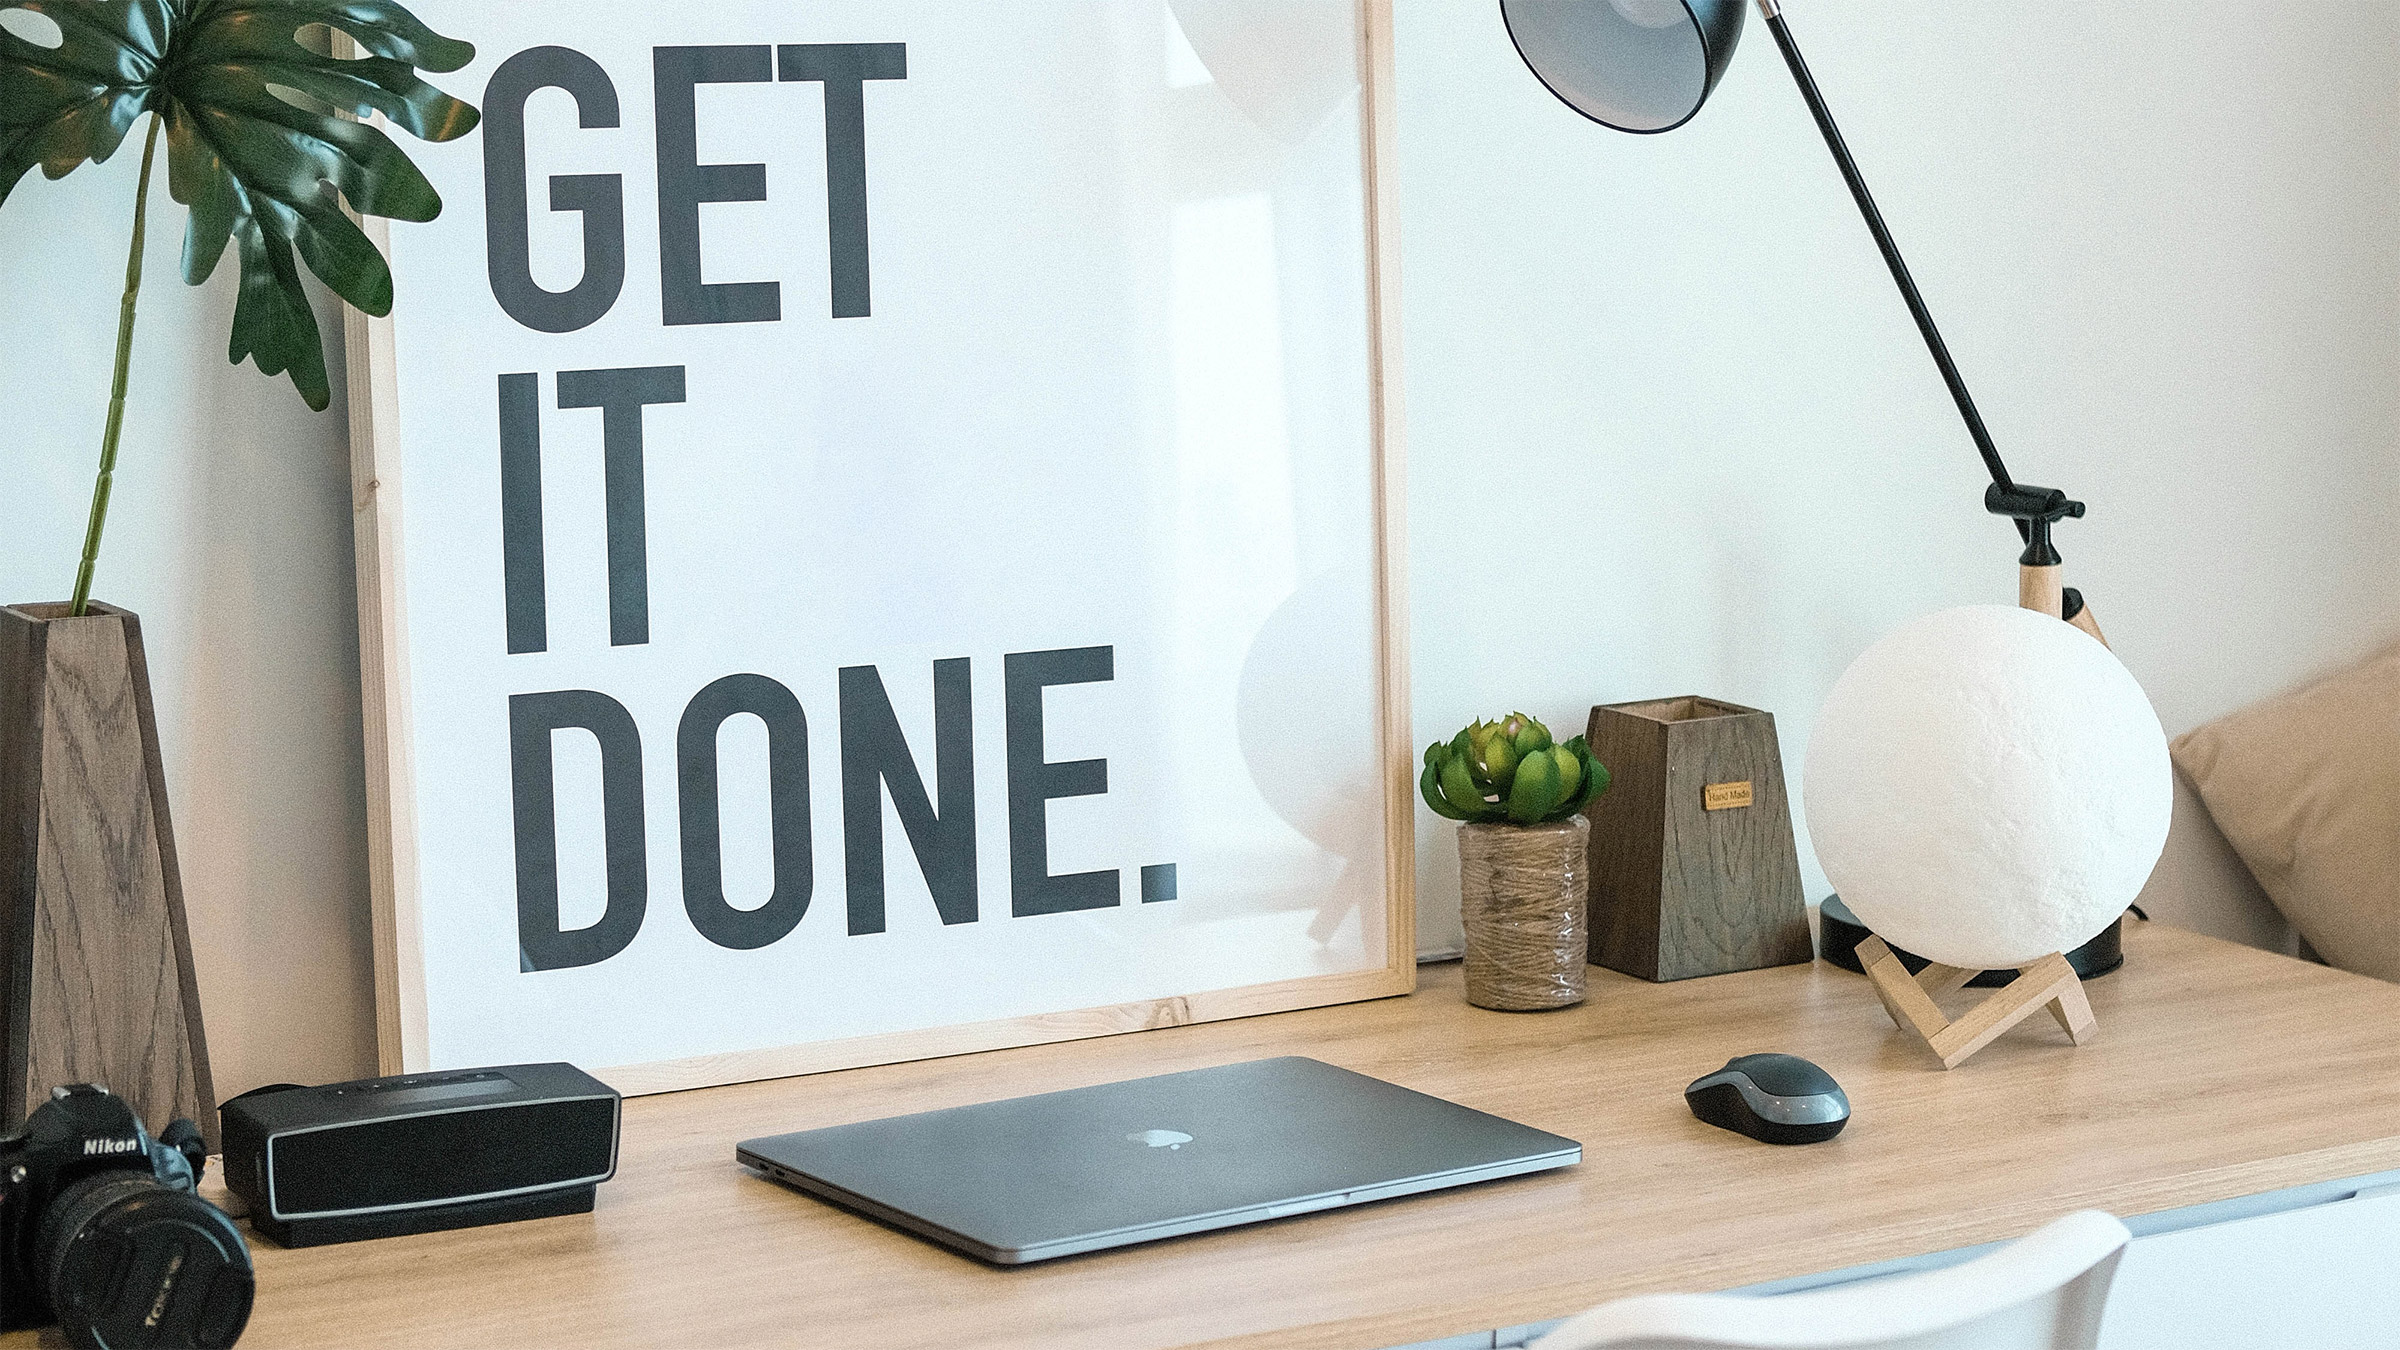 Get it done poster in home office